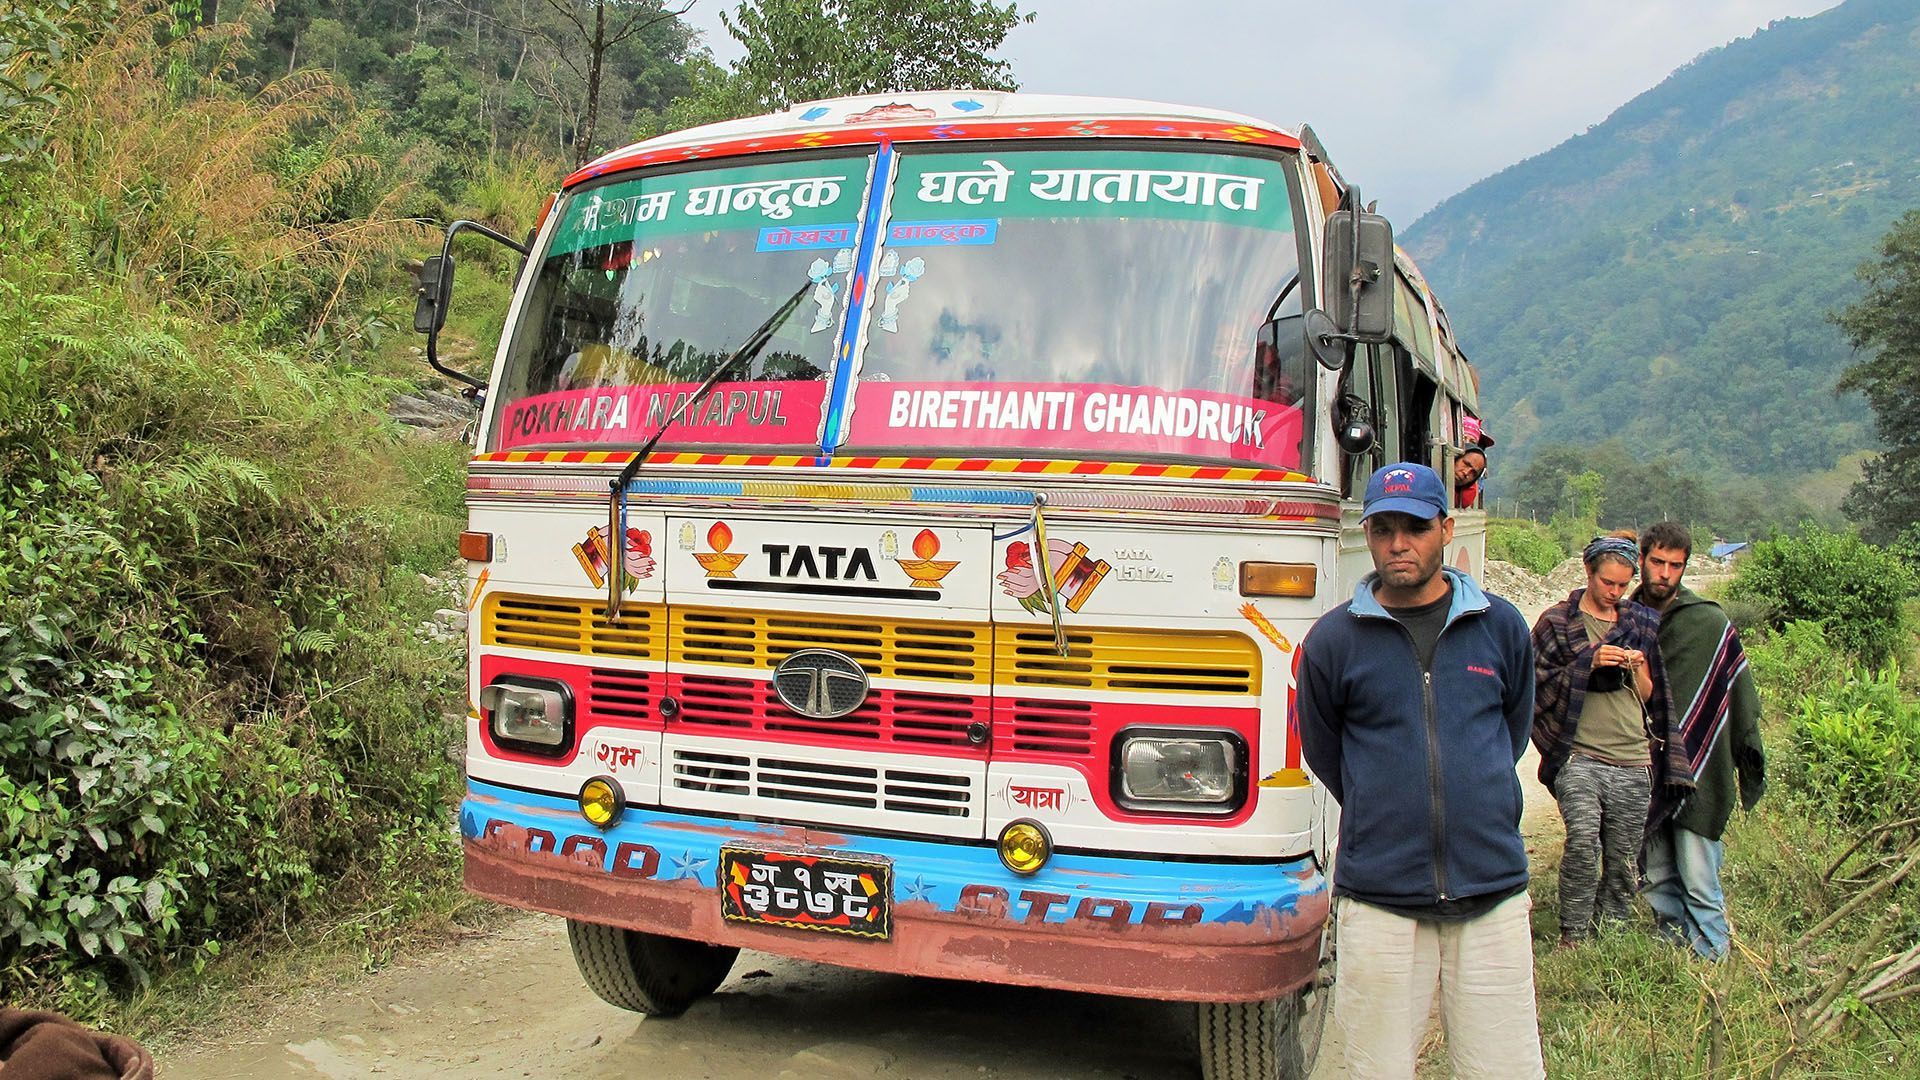 Colorful local bus in Nepal